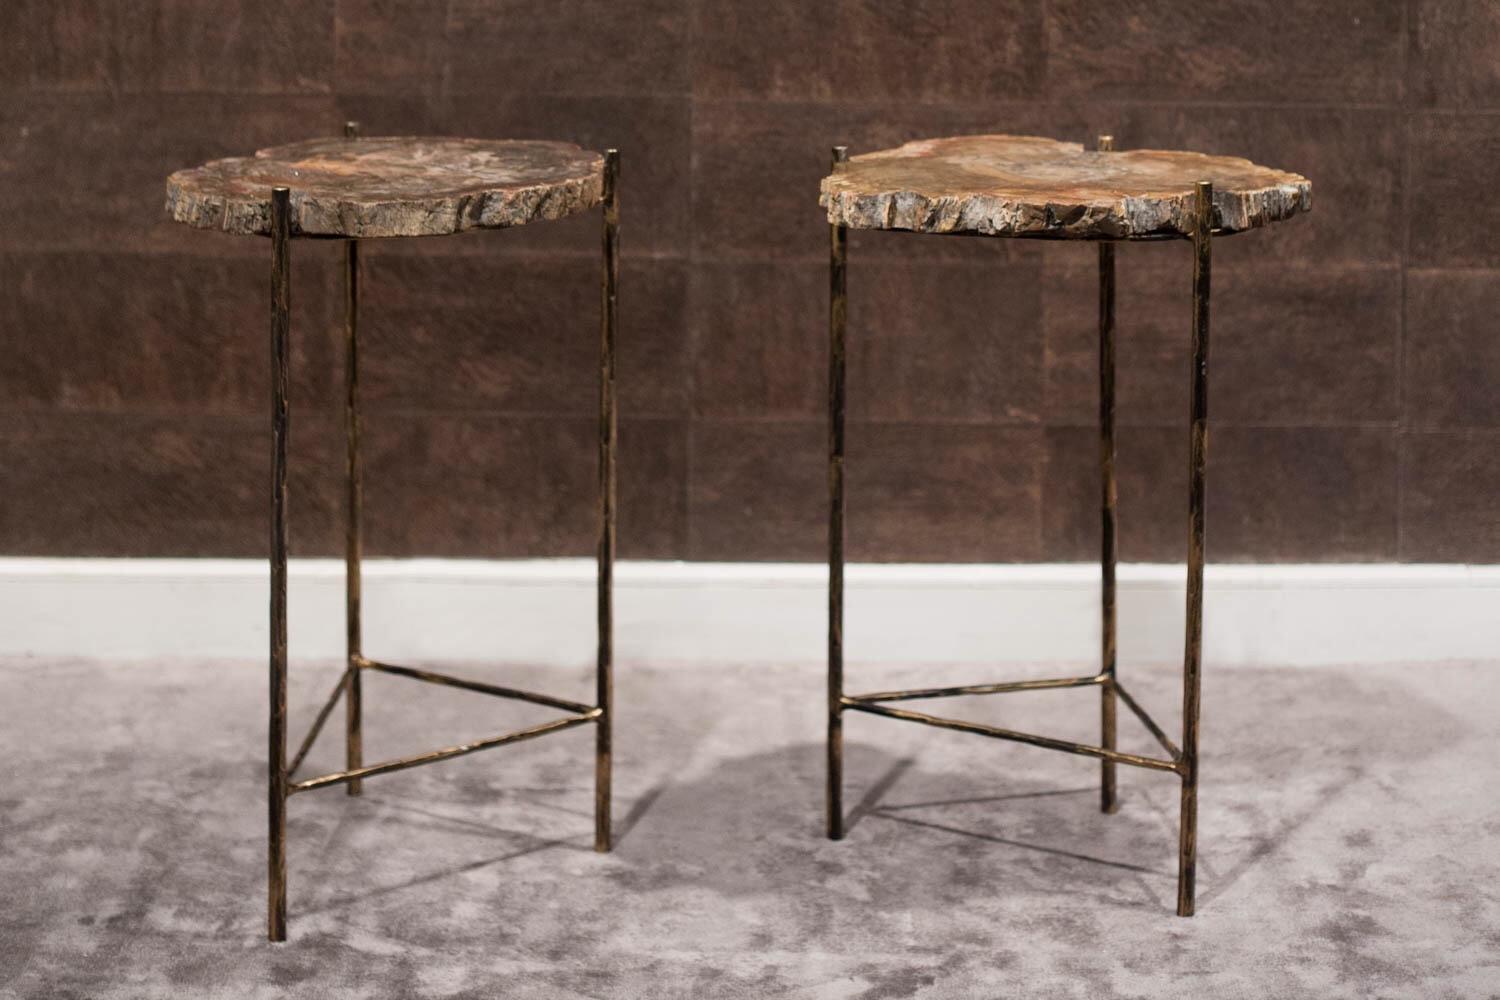 The two tabletops are made of two wonderfully unique, irregular pieces of veined fossil wood, supported on a three-foot base in black iron with golden highlights. In the lower part, the legs are joined together by a triangular piece, also black iron